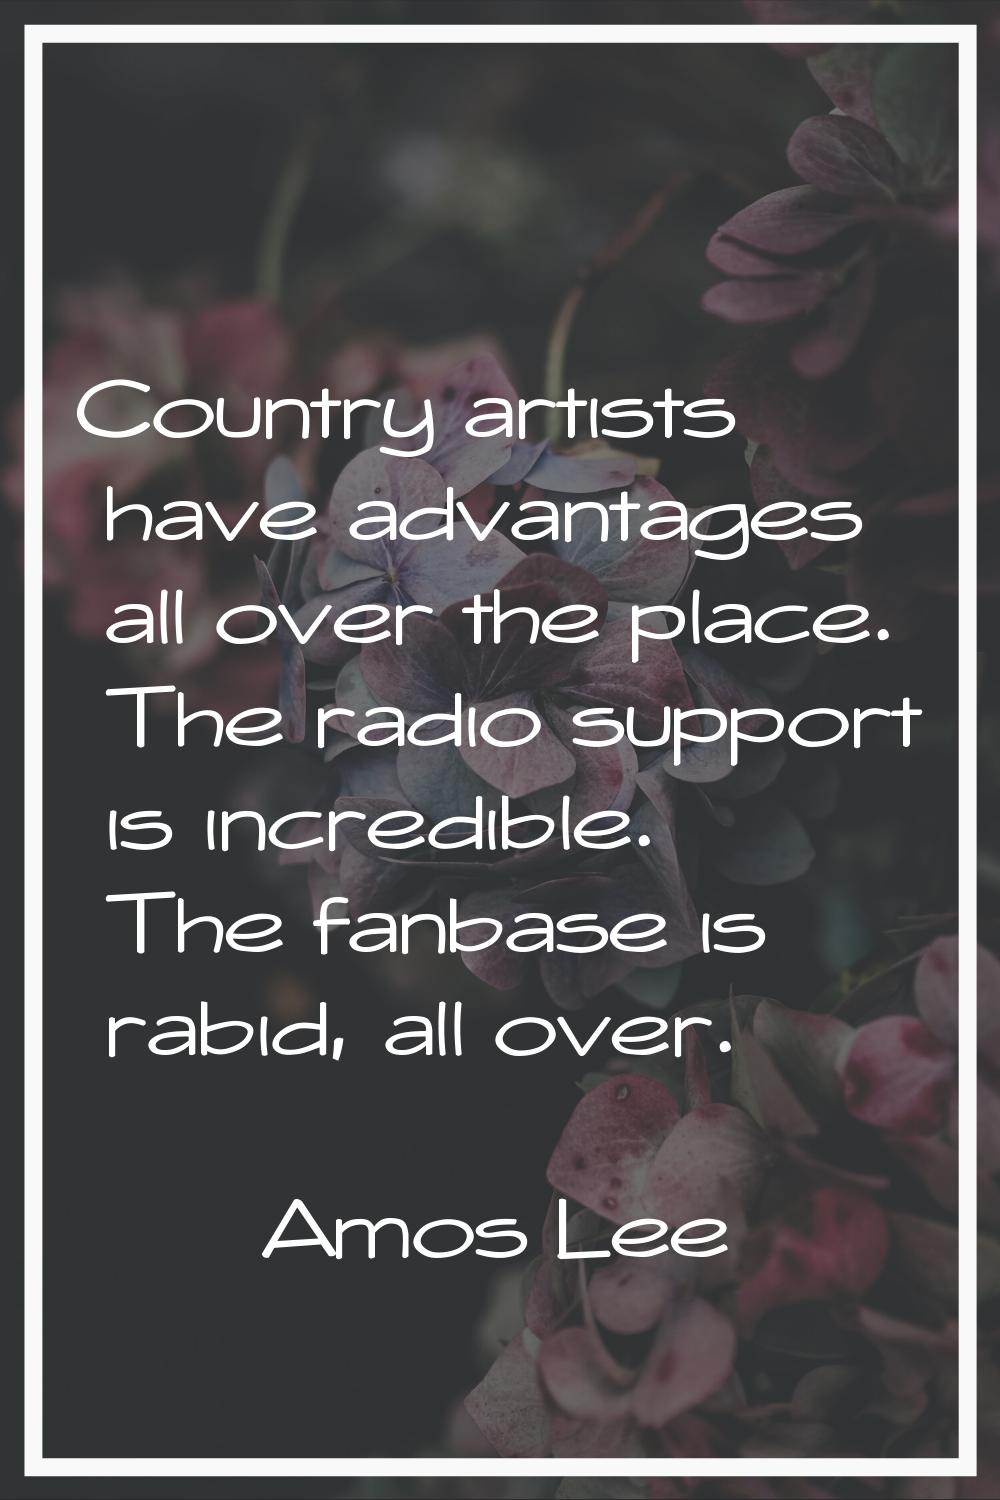 Country artists have advantages all over the place. The radio support is incredible. The fanbase is